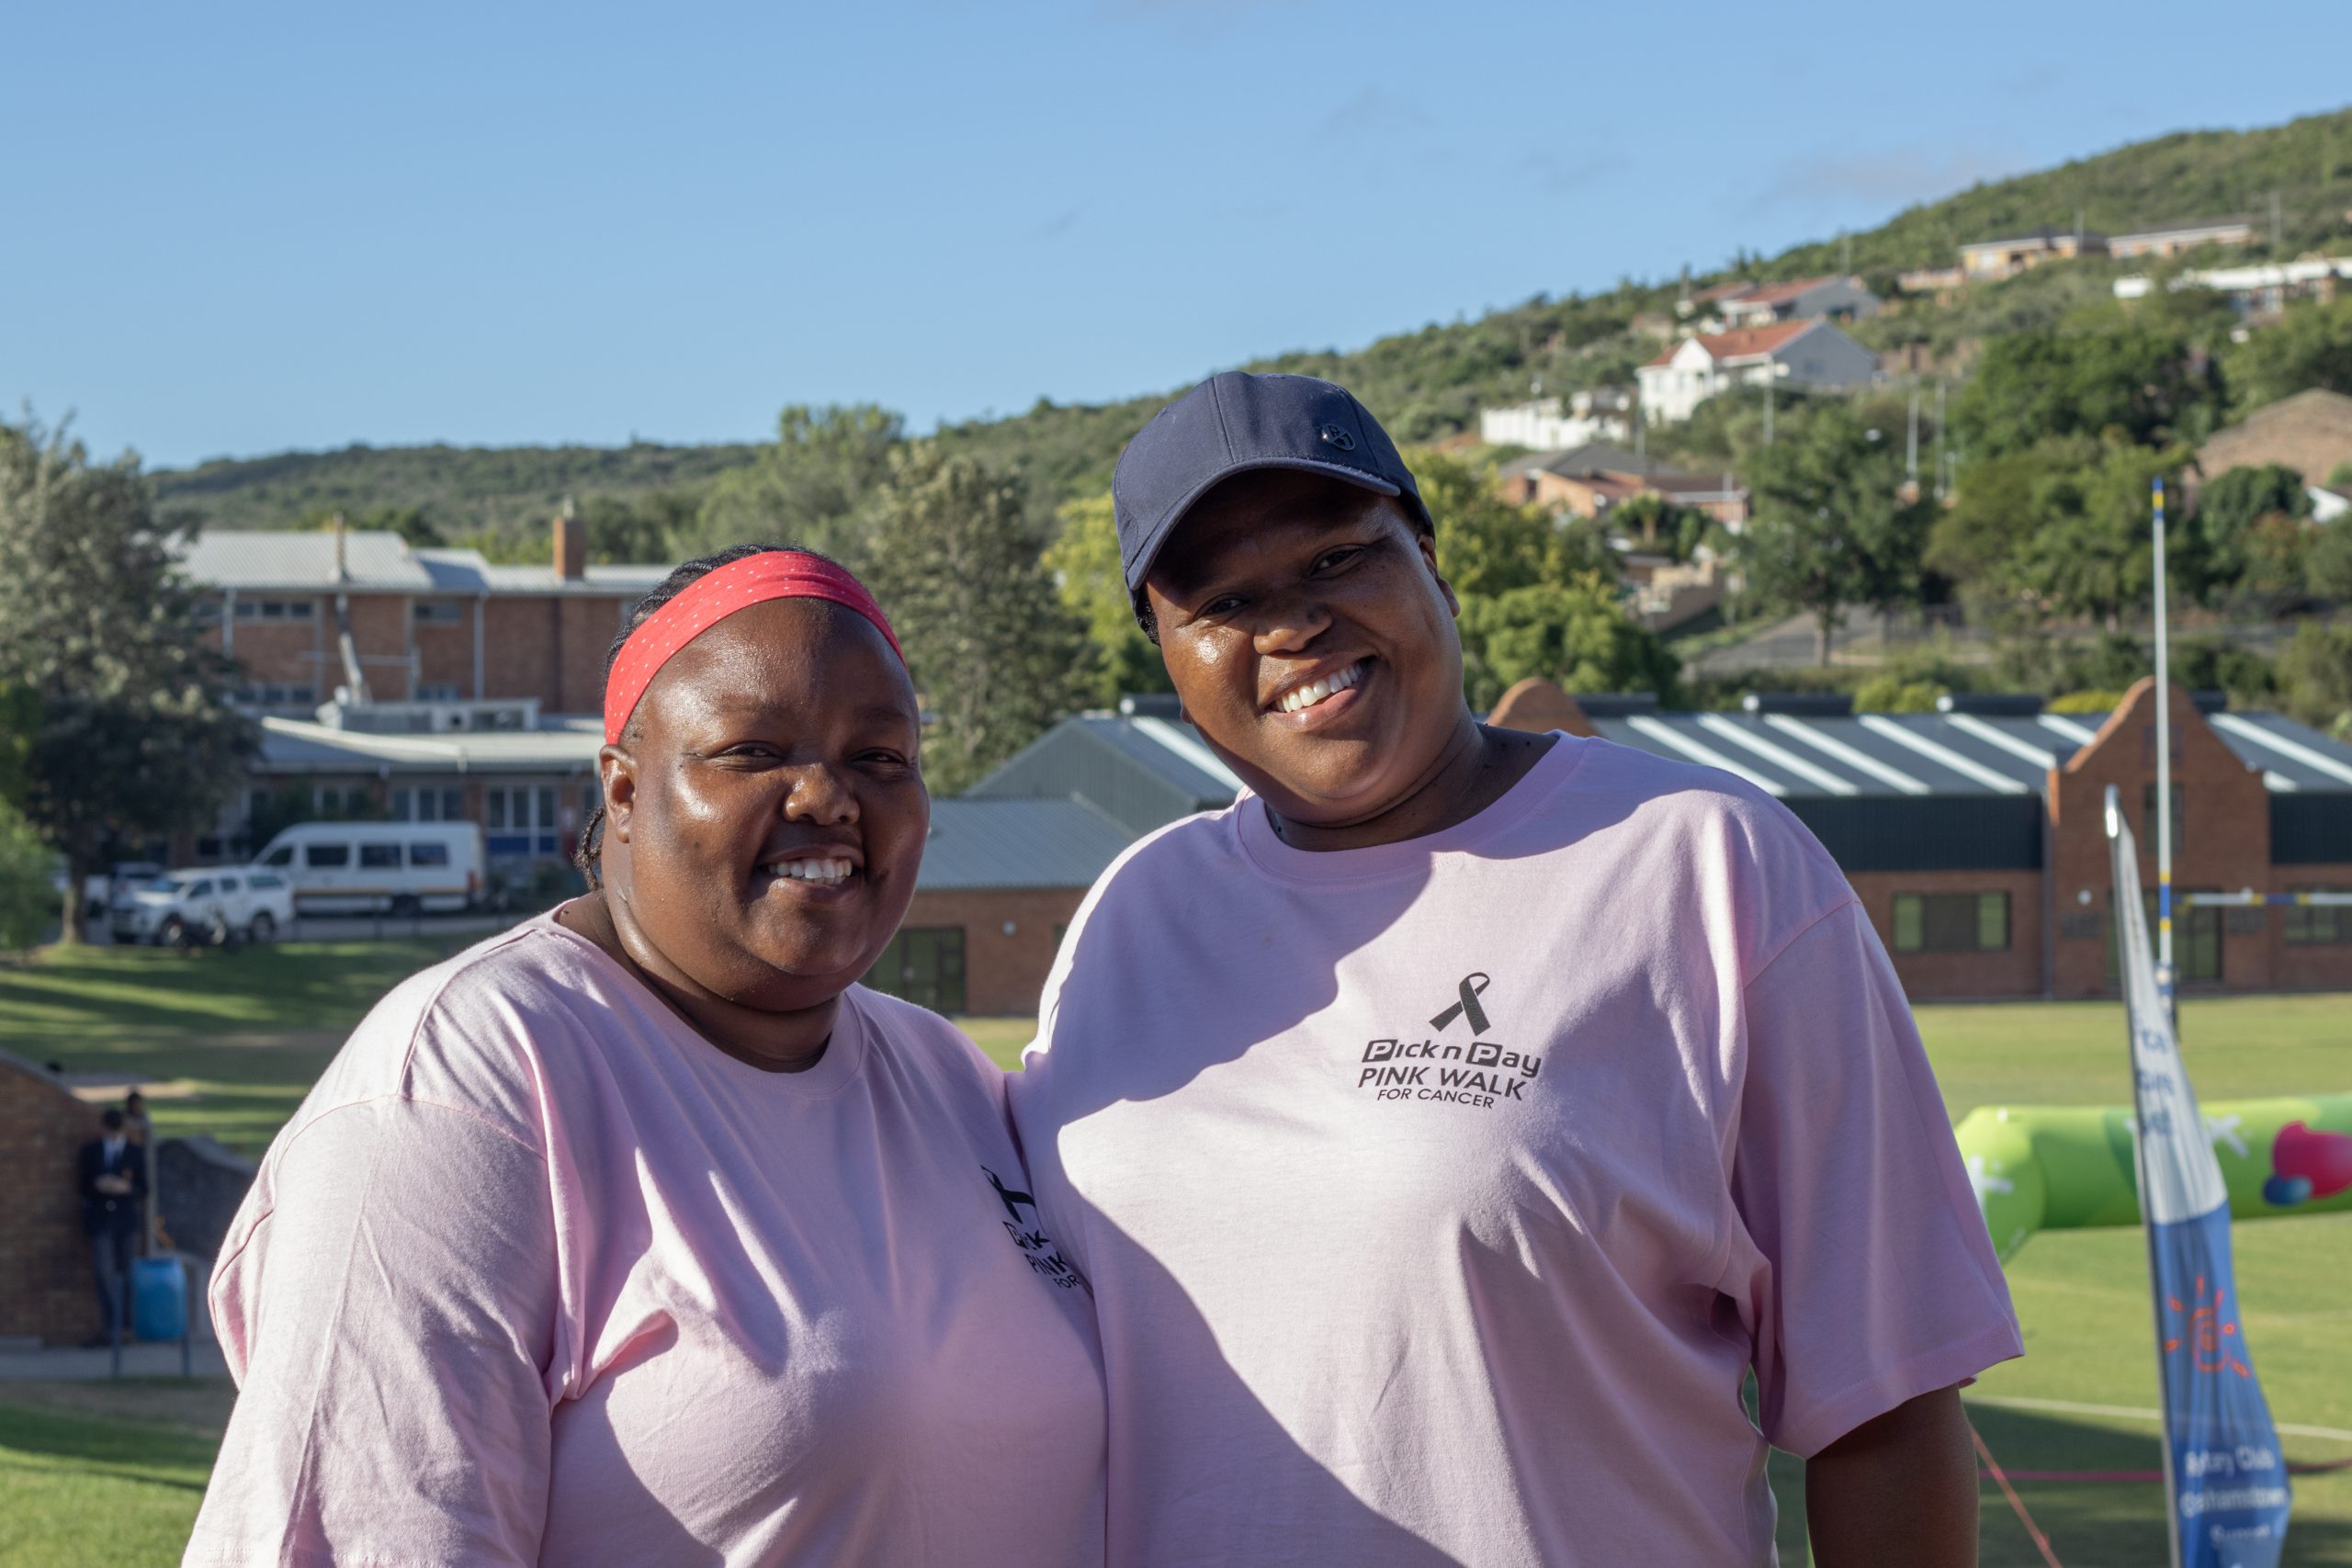 From left to right, Olwethu Molefe and Mandisa Xayimpi Klaas. photo by RIkie Lai.